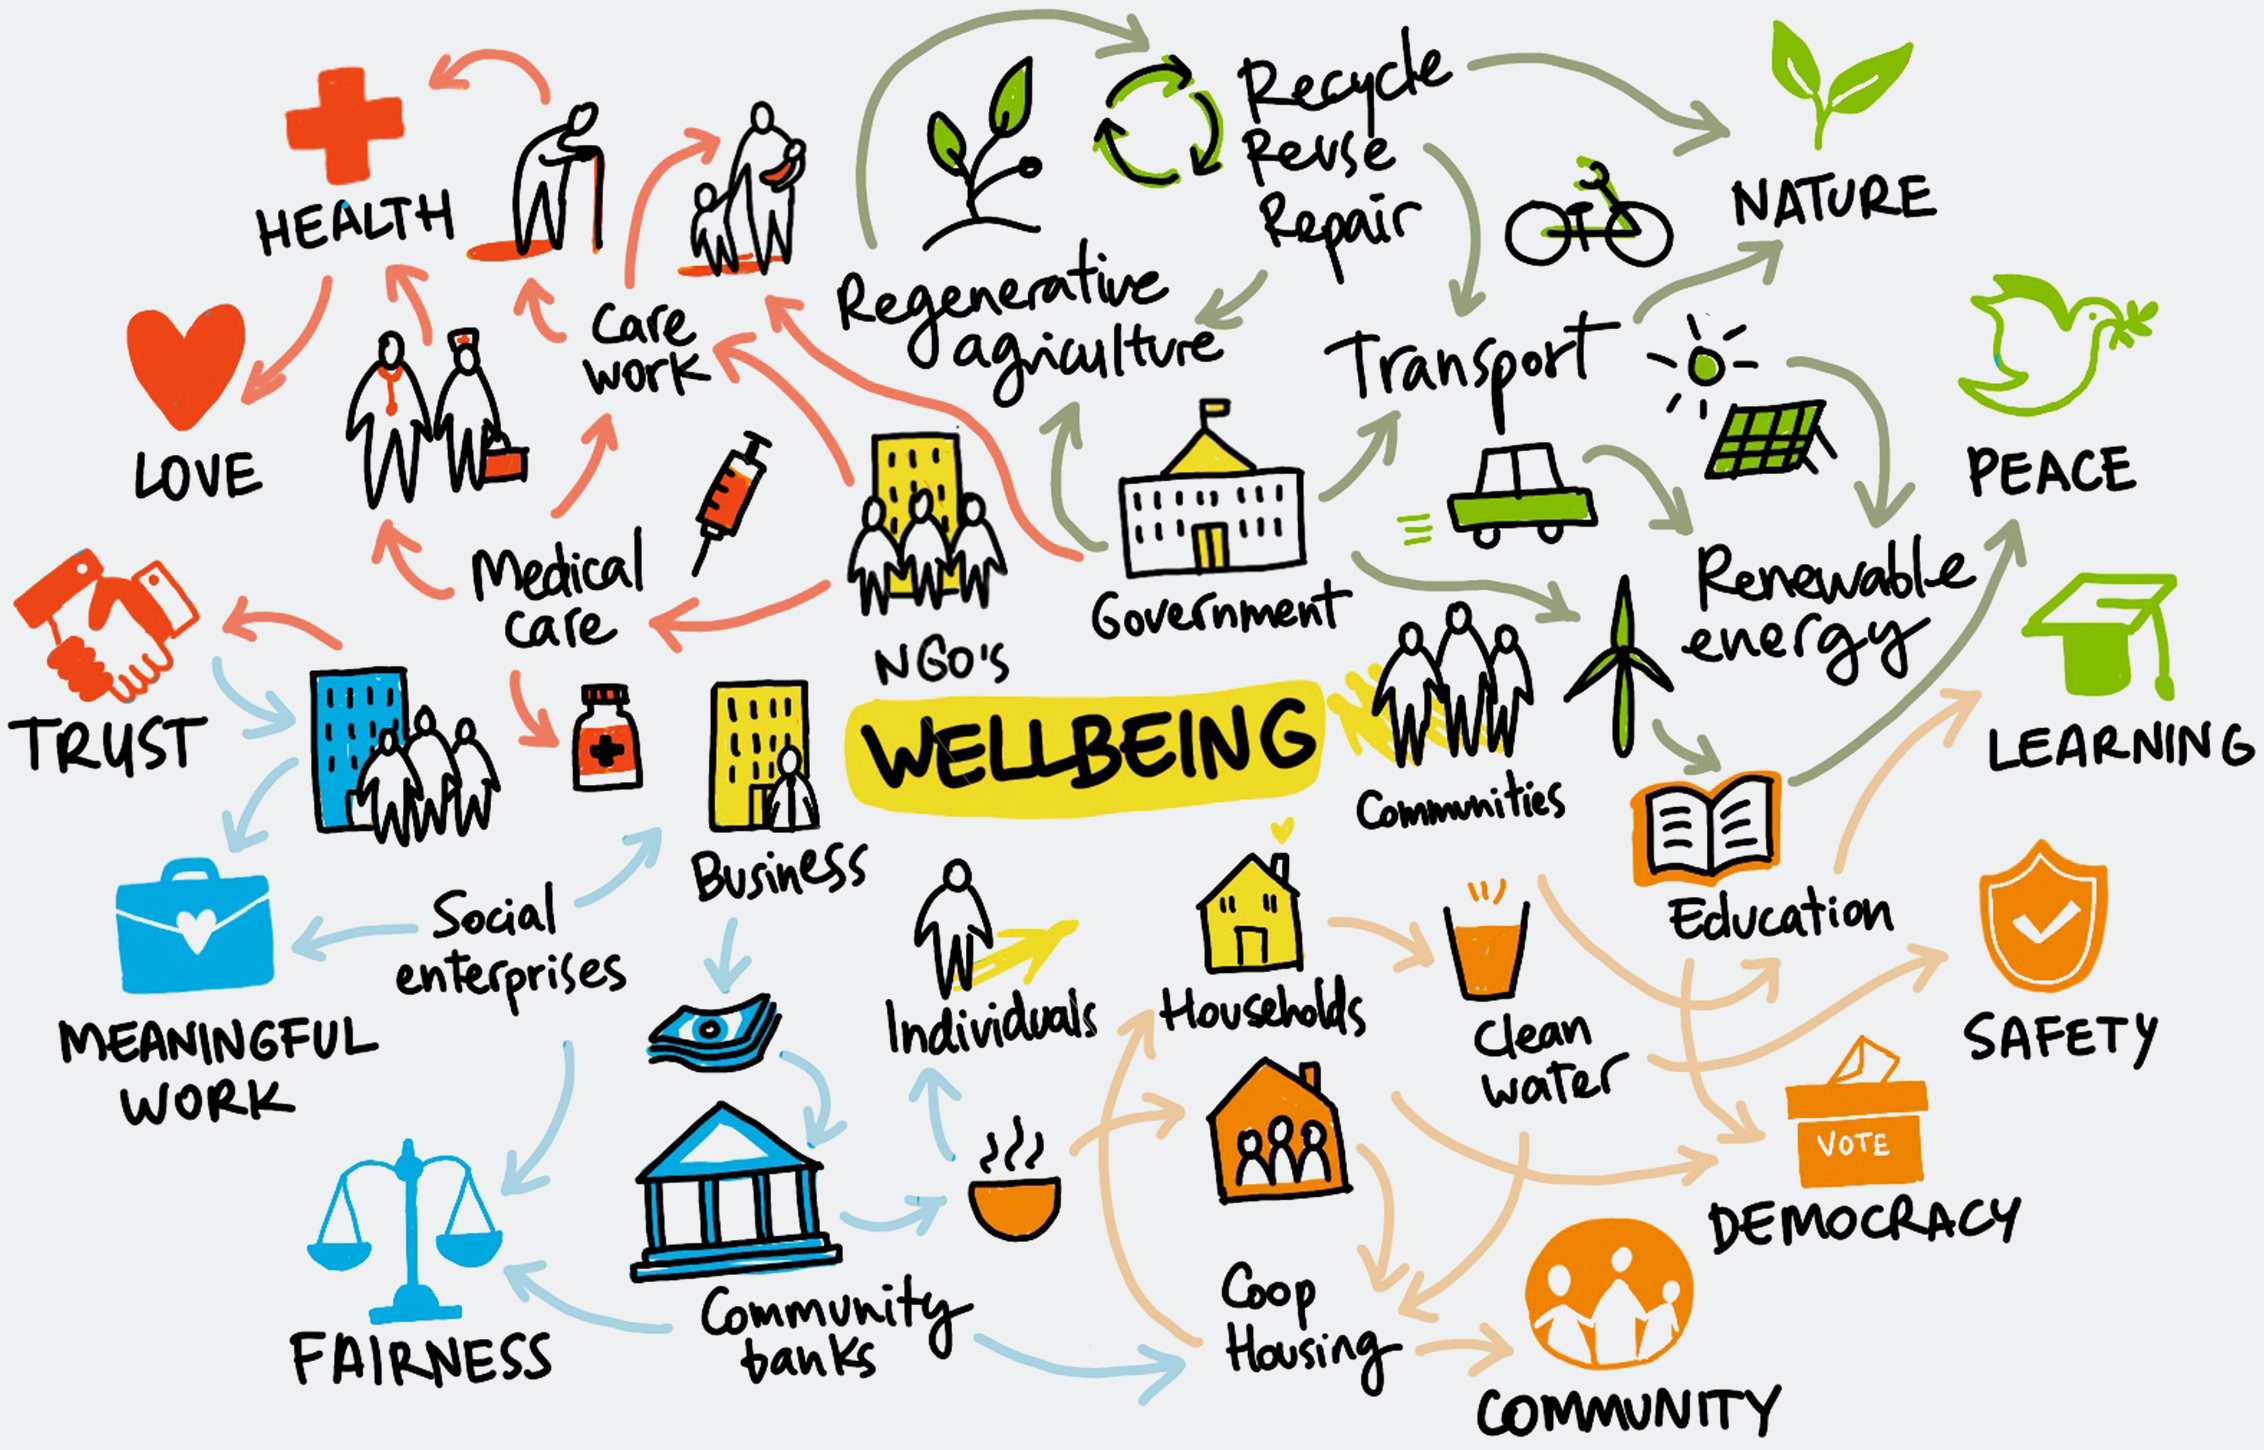 Hand drawn graphic illustrating what wellbeing is about